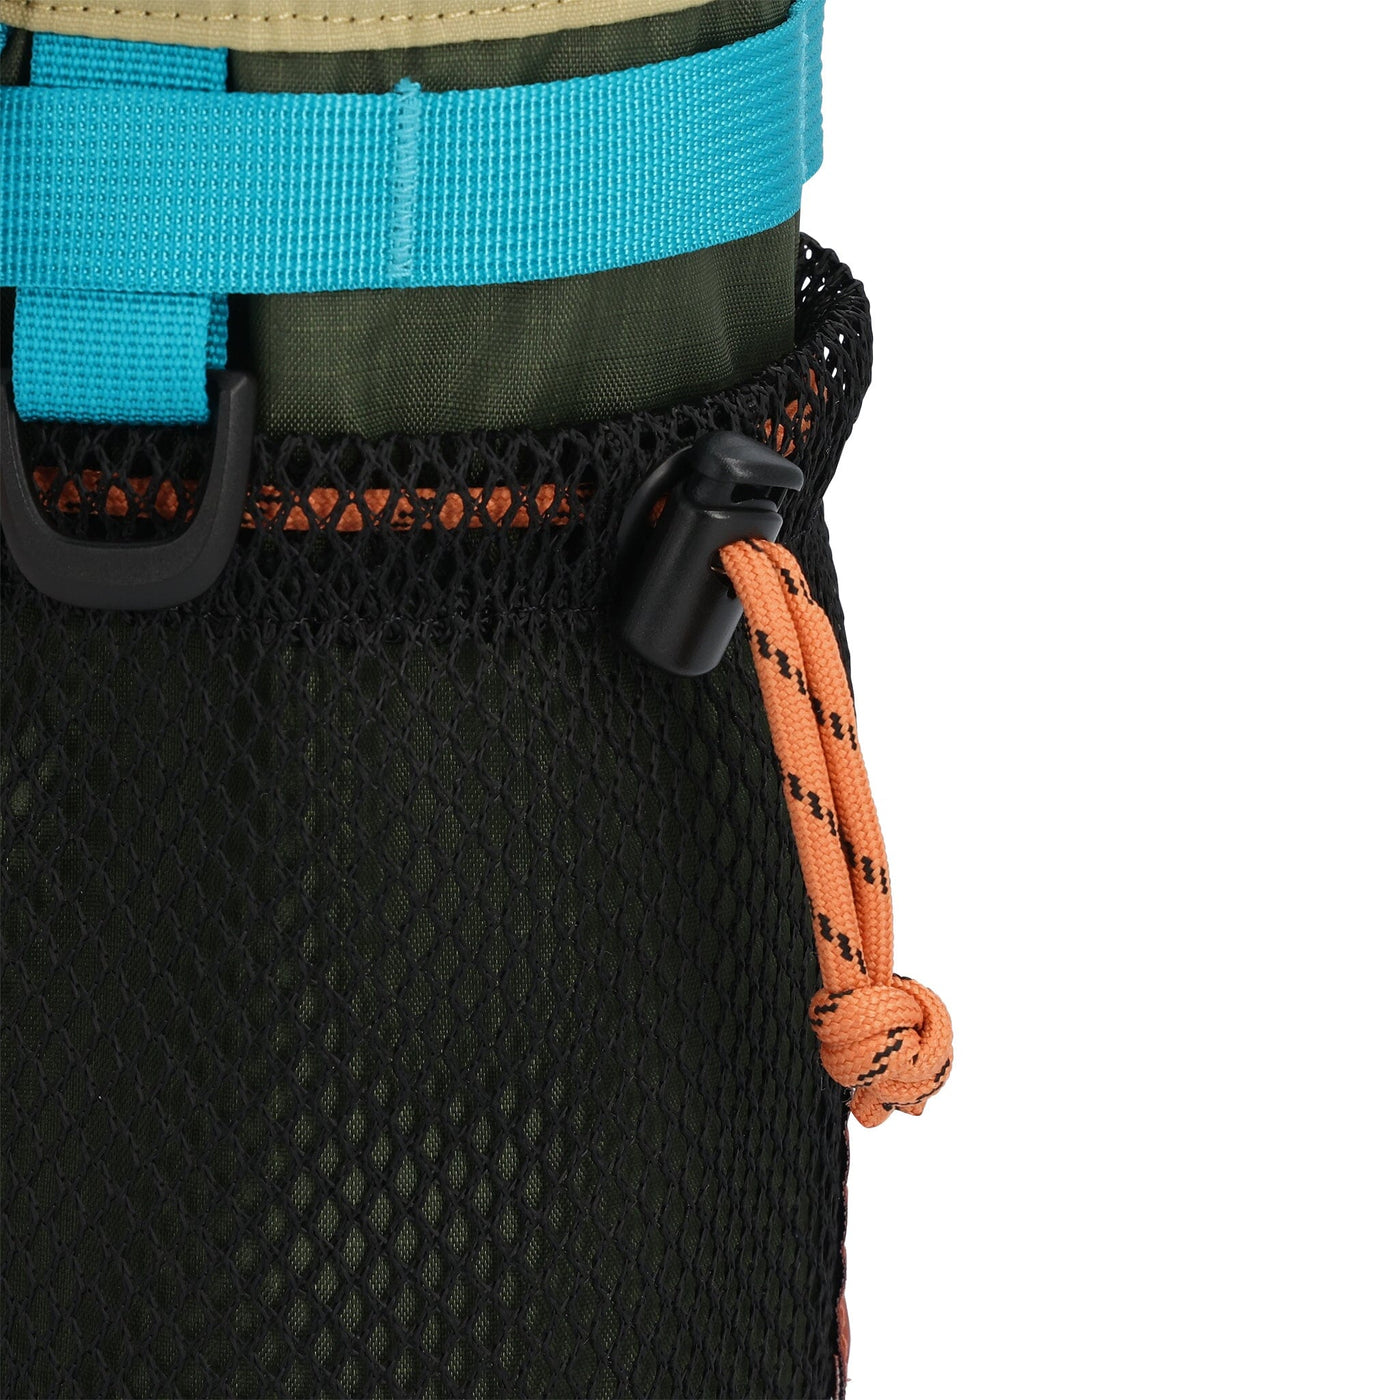 topo designs mountain hydro sling 1.7L bag Paracord cinch and lock at top and front mesh pocket